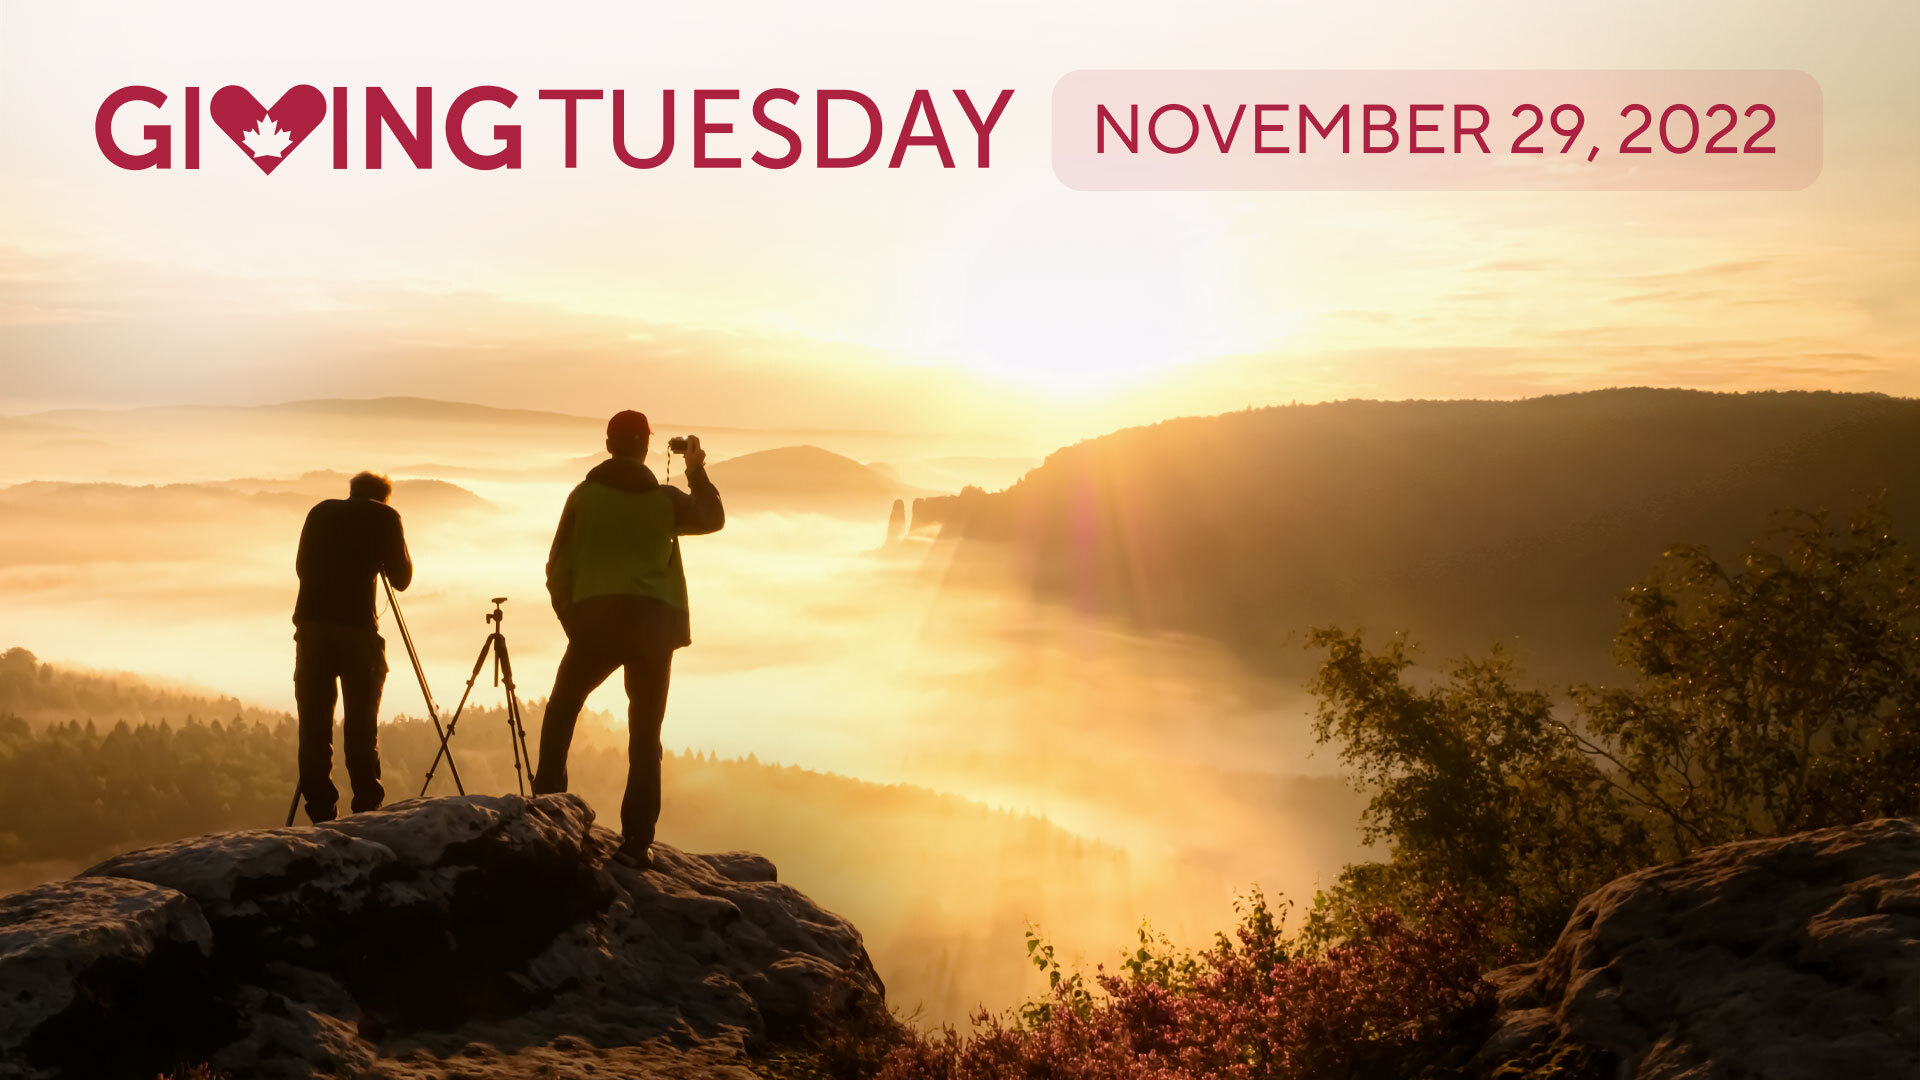 Get ready for GivingTuesday!